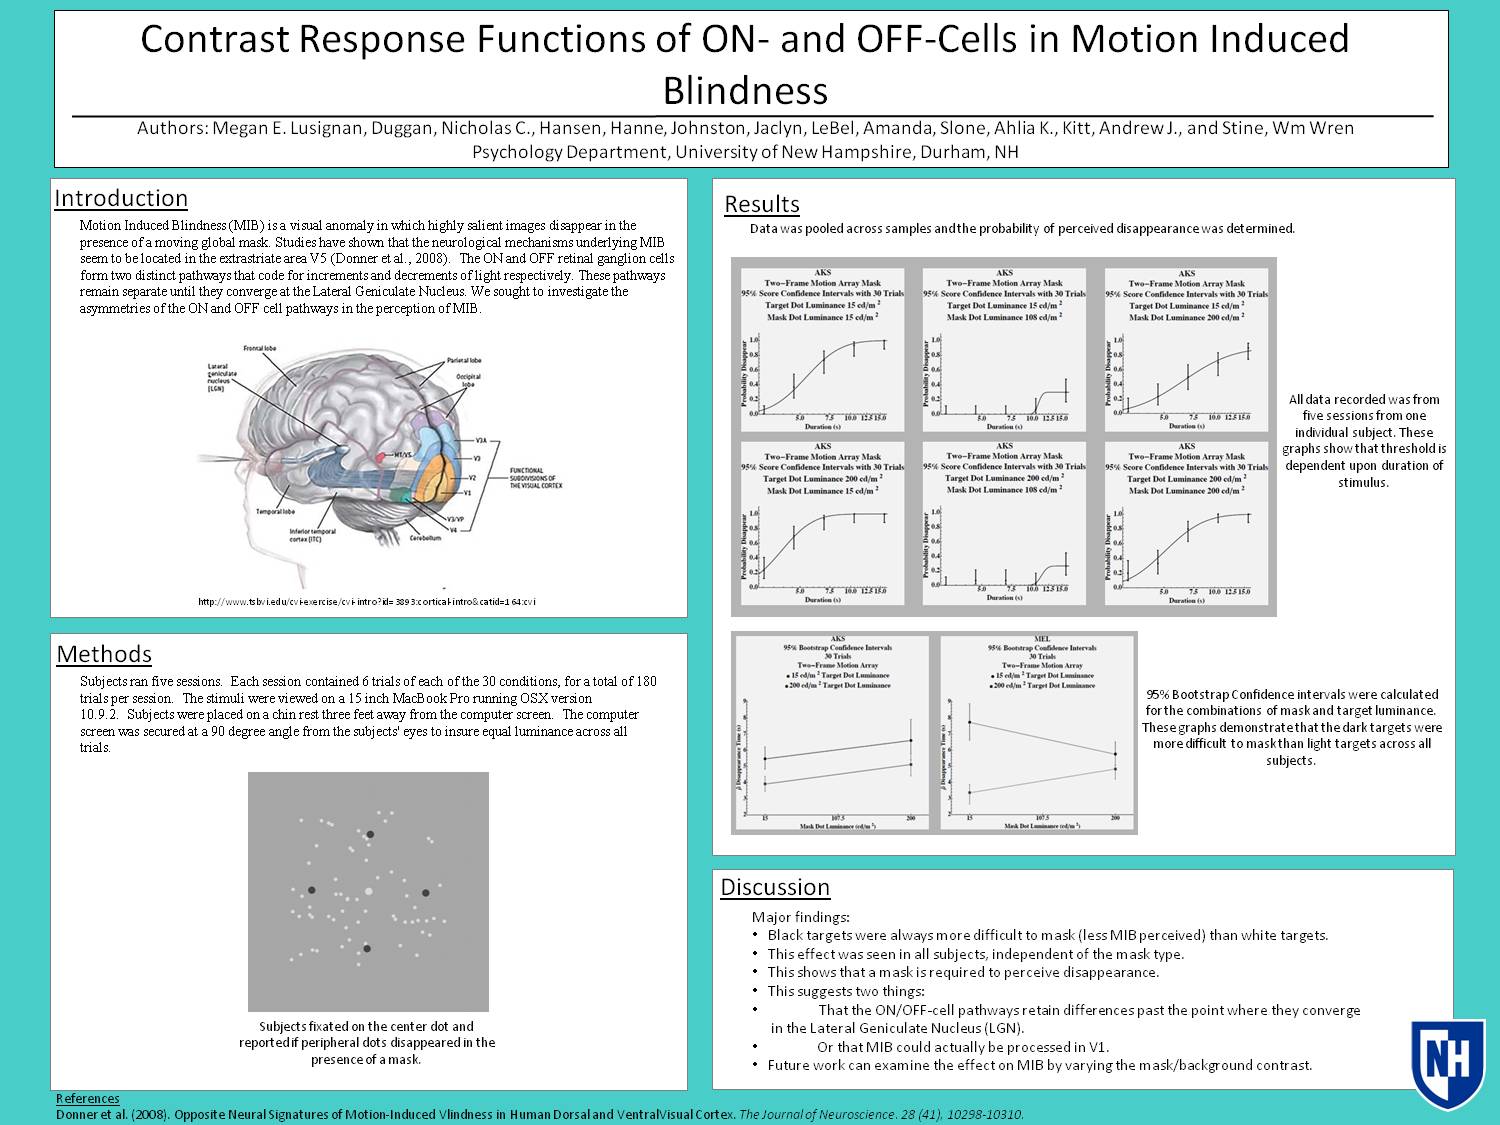 Contrast Response Functions Of On- And Off-Cells In Motion Induced Blindness by mej279